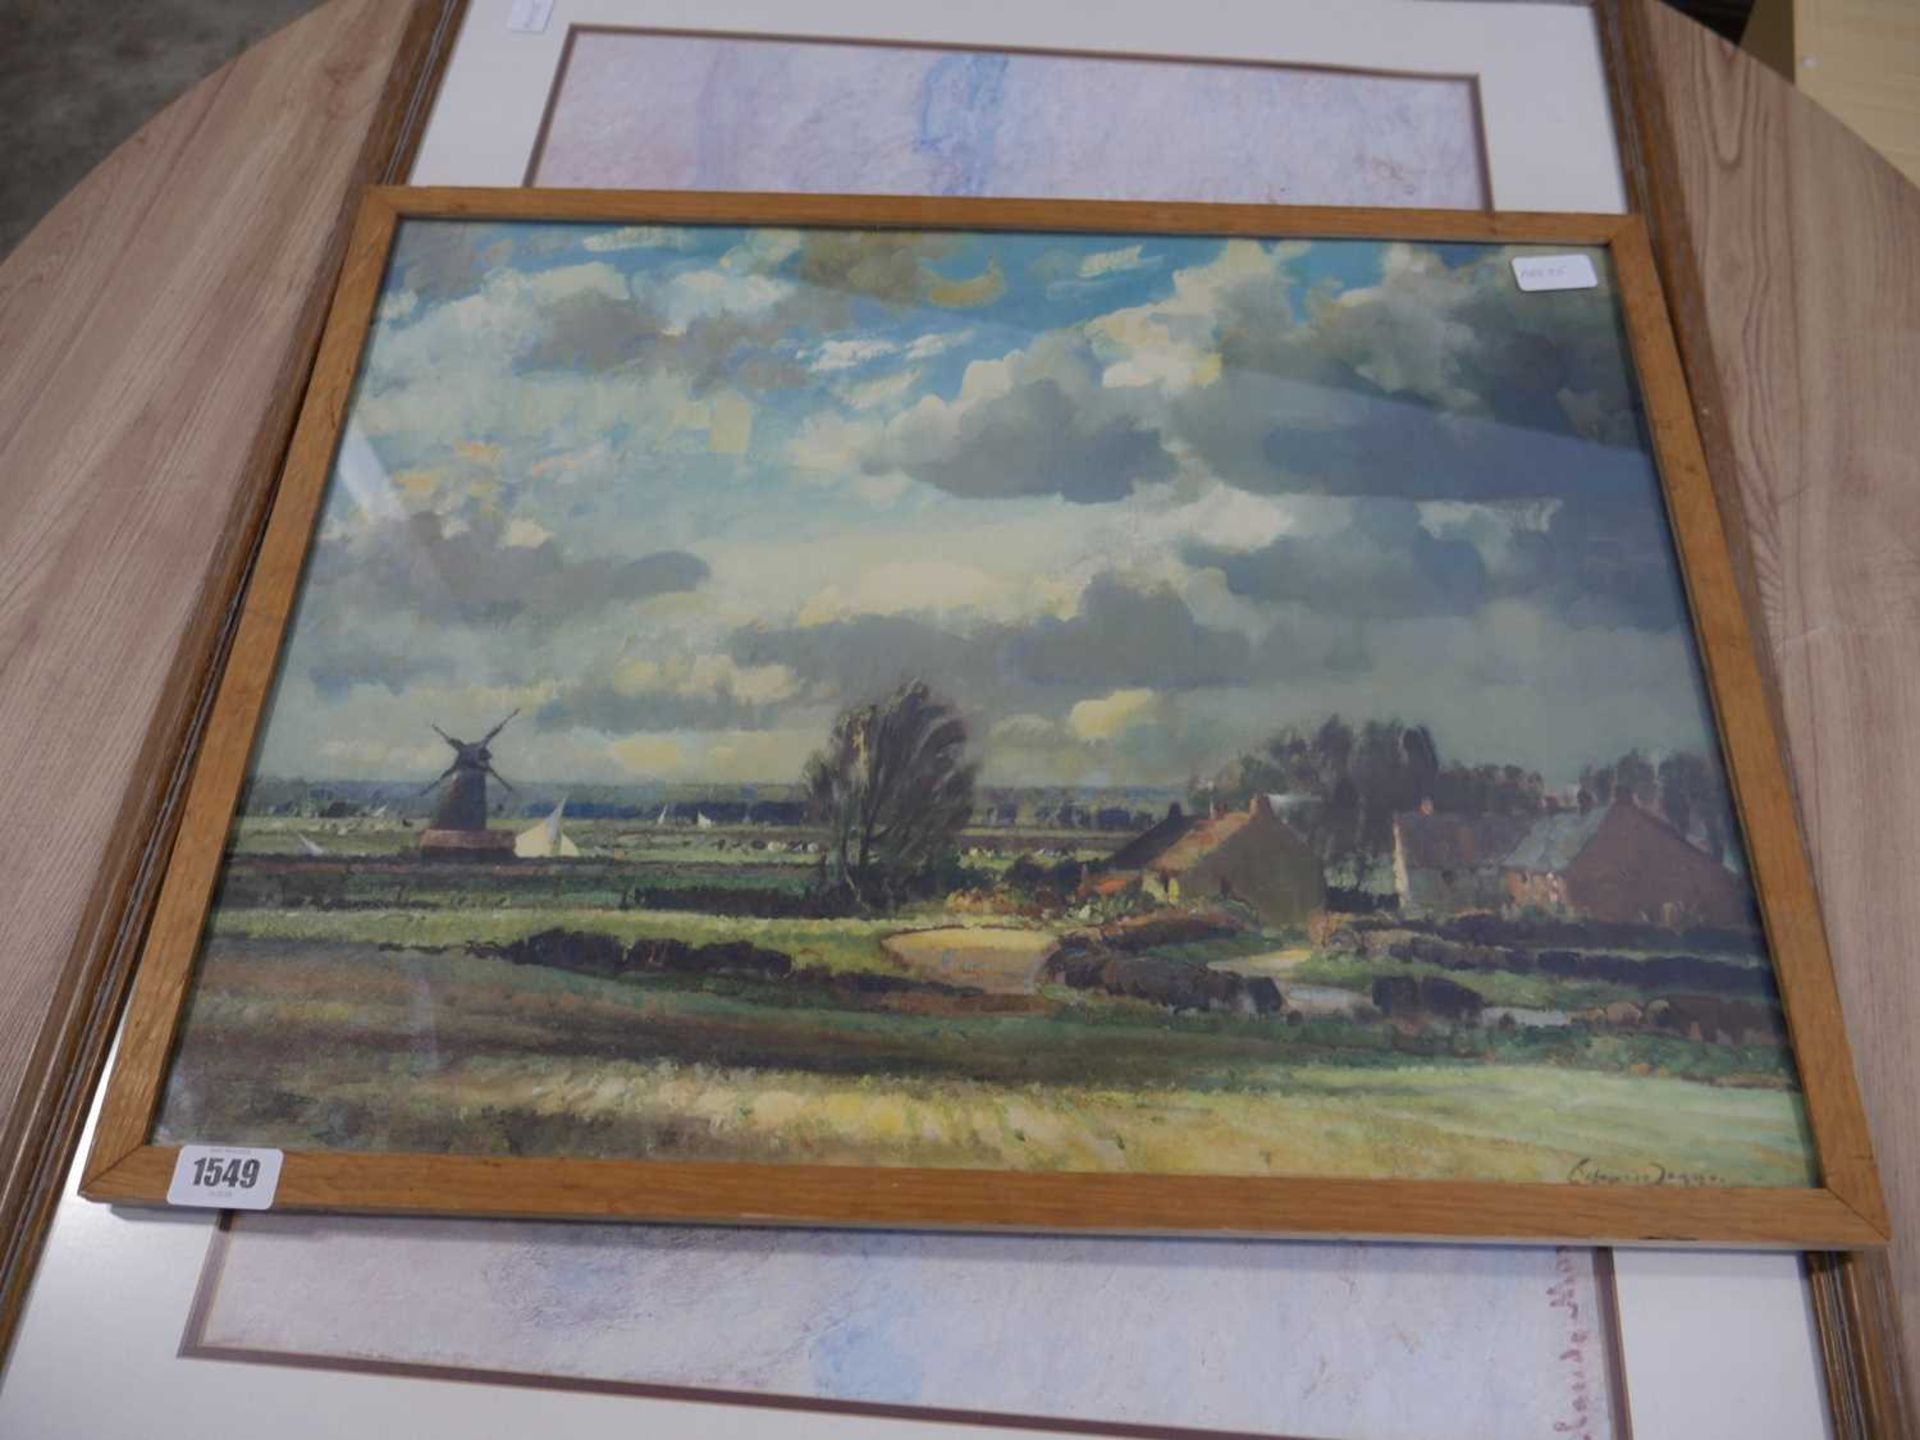 Framed print by Sego with a framed print by Monet - Image 2 of 2